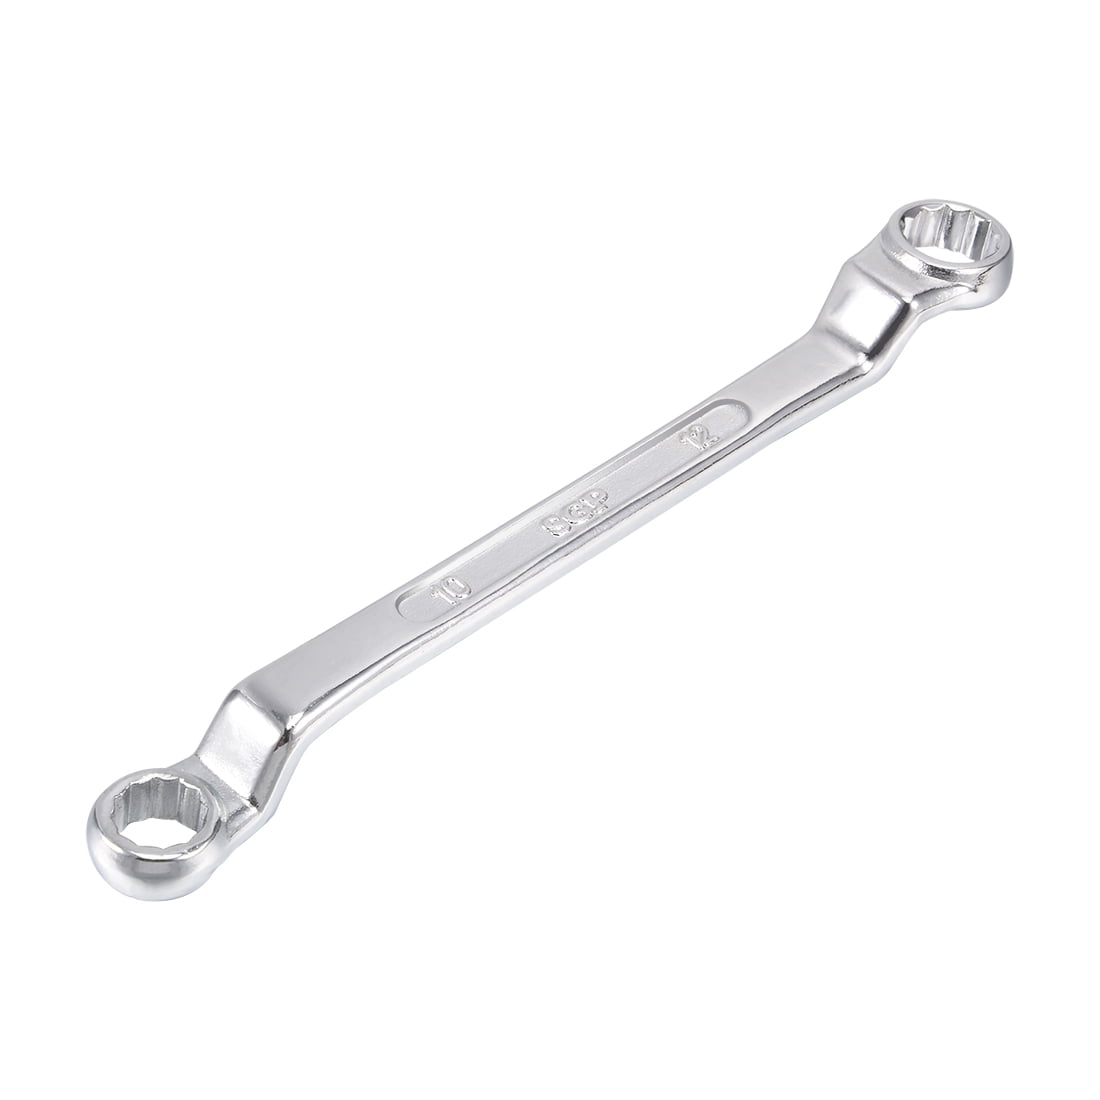 Cr-V 17mm x 19mm 12 Point Offset Double Box End Wrench Polished Finish 